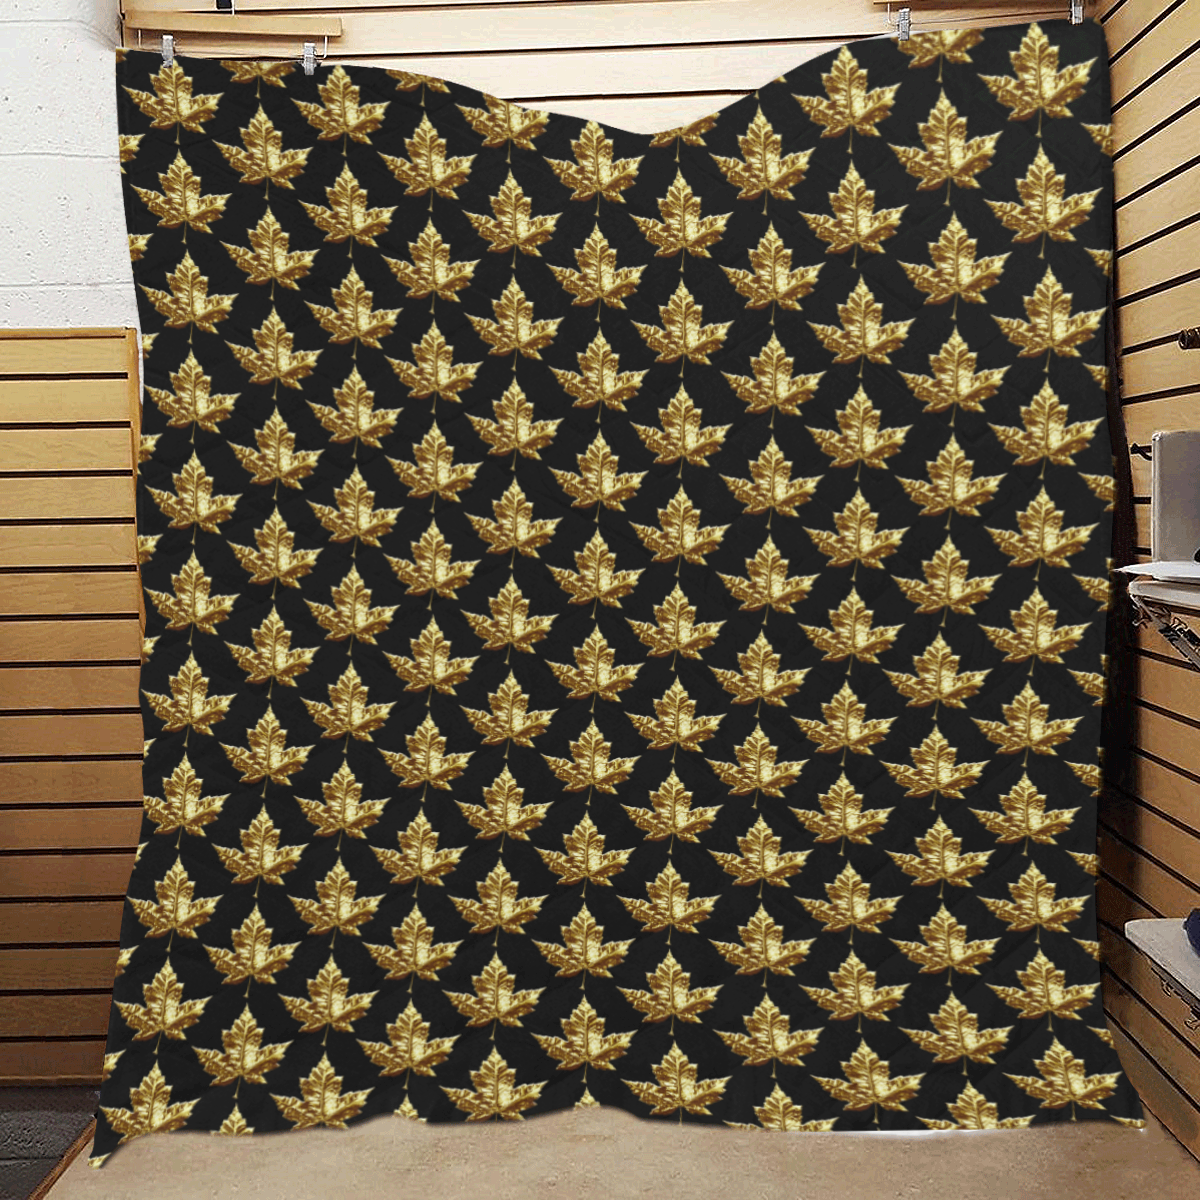 Gold Canada Maple Leaf Quilt 60"x70"